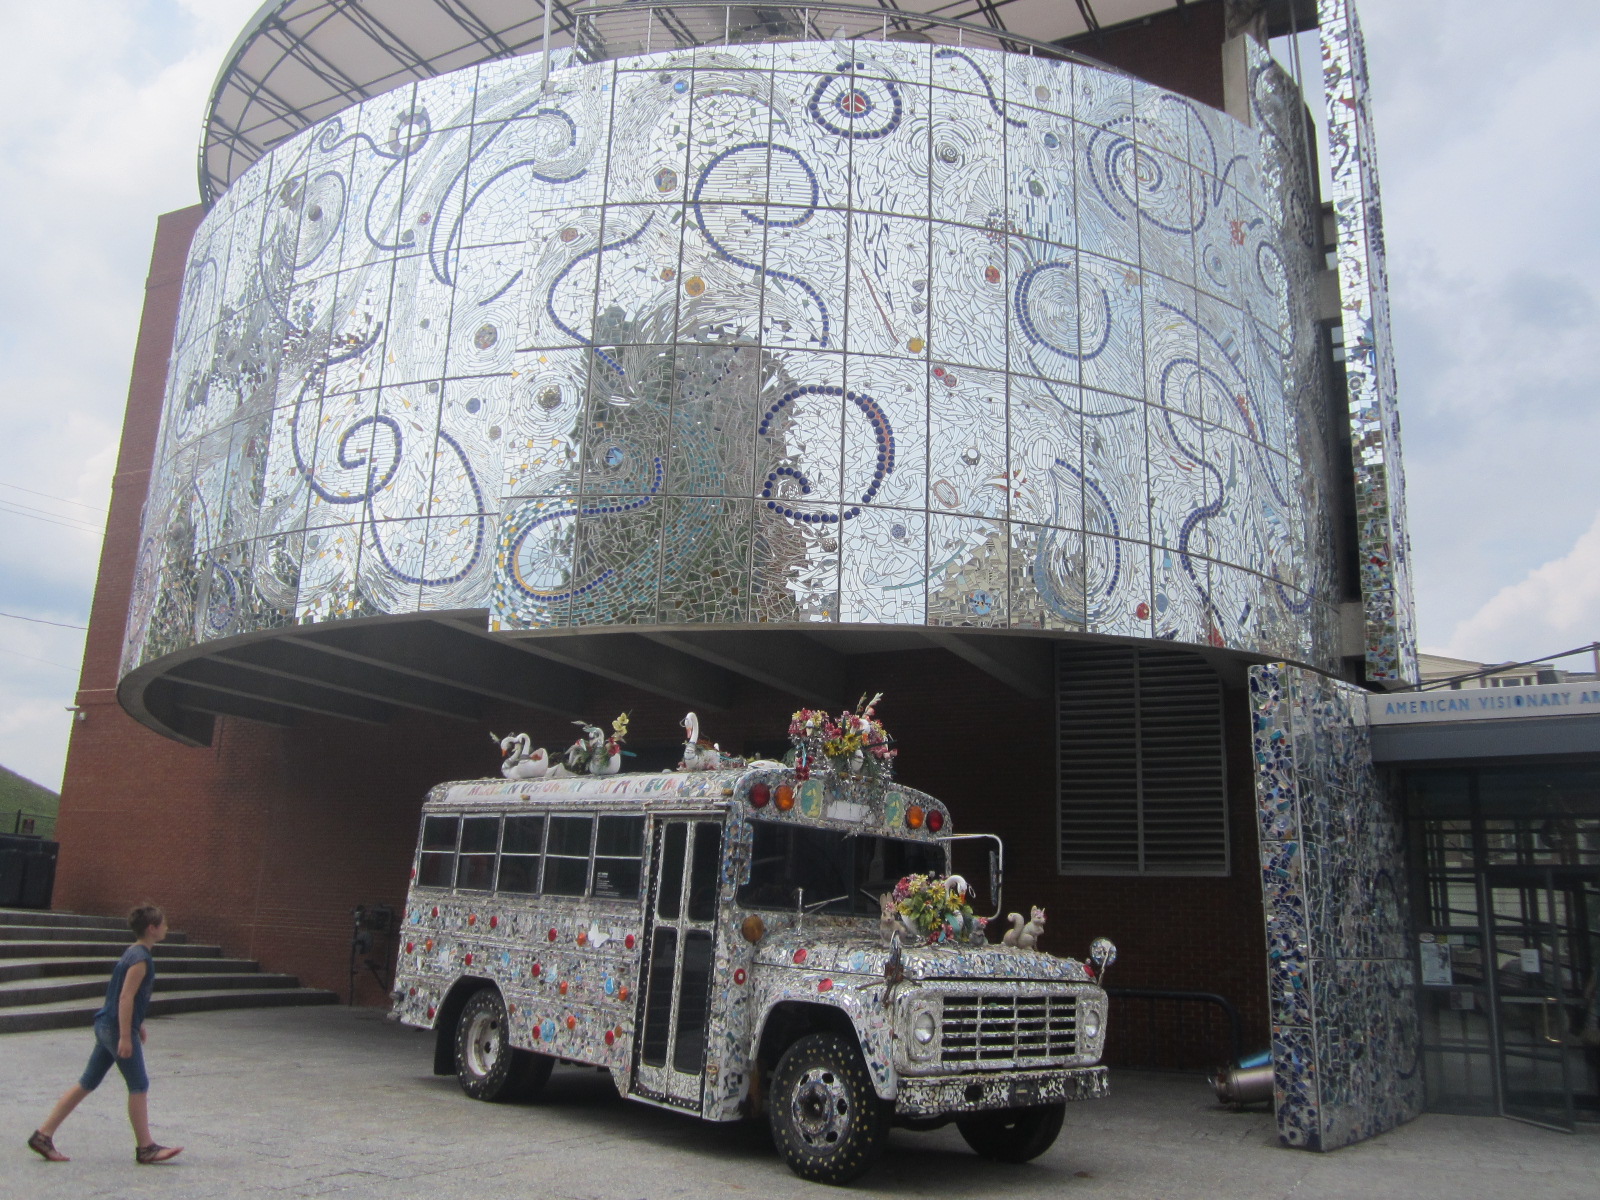 American Visionary Art Museum Entrance in Baltimore, Maryland